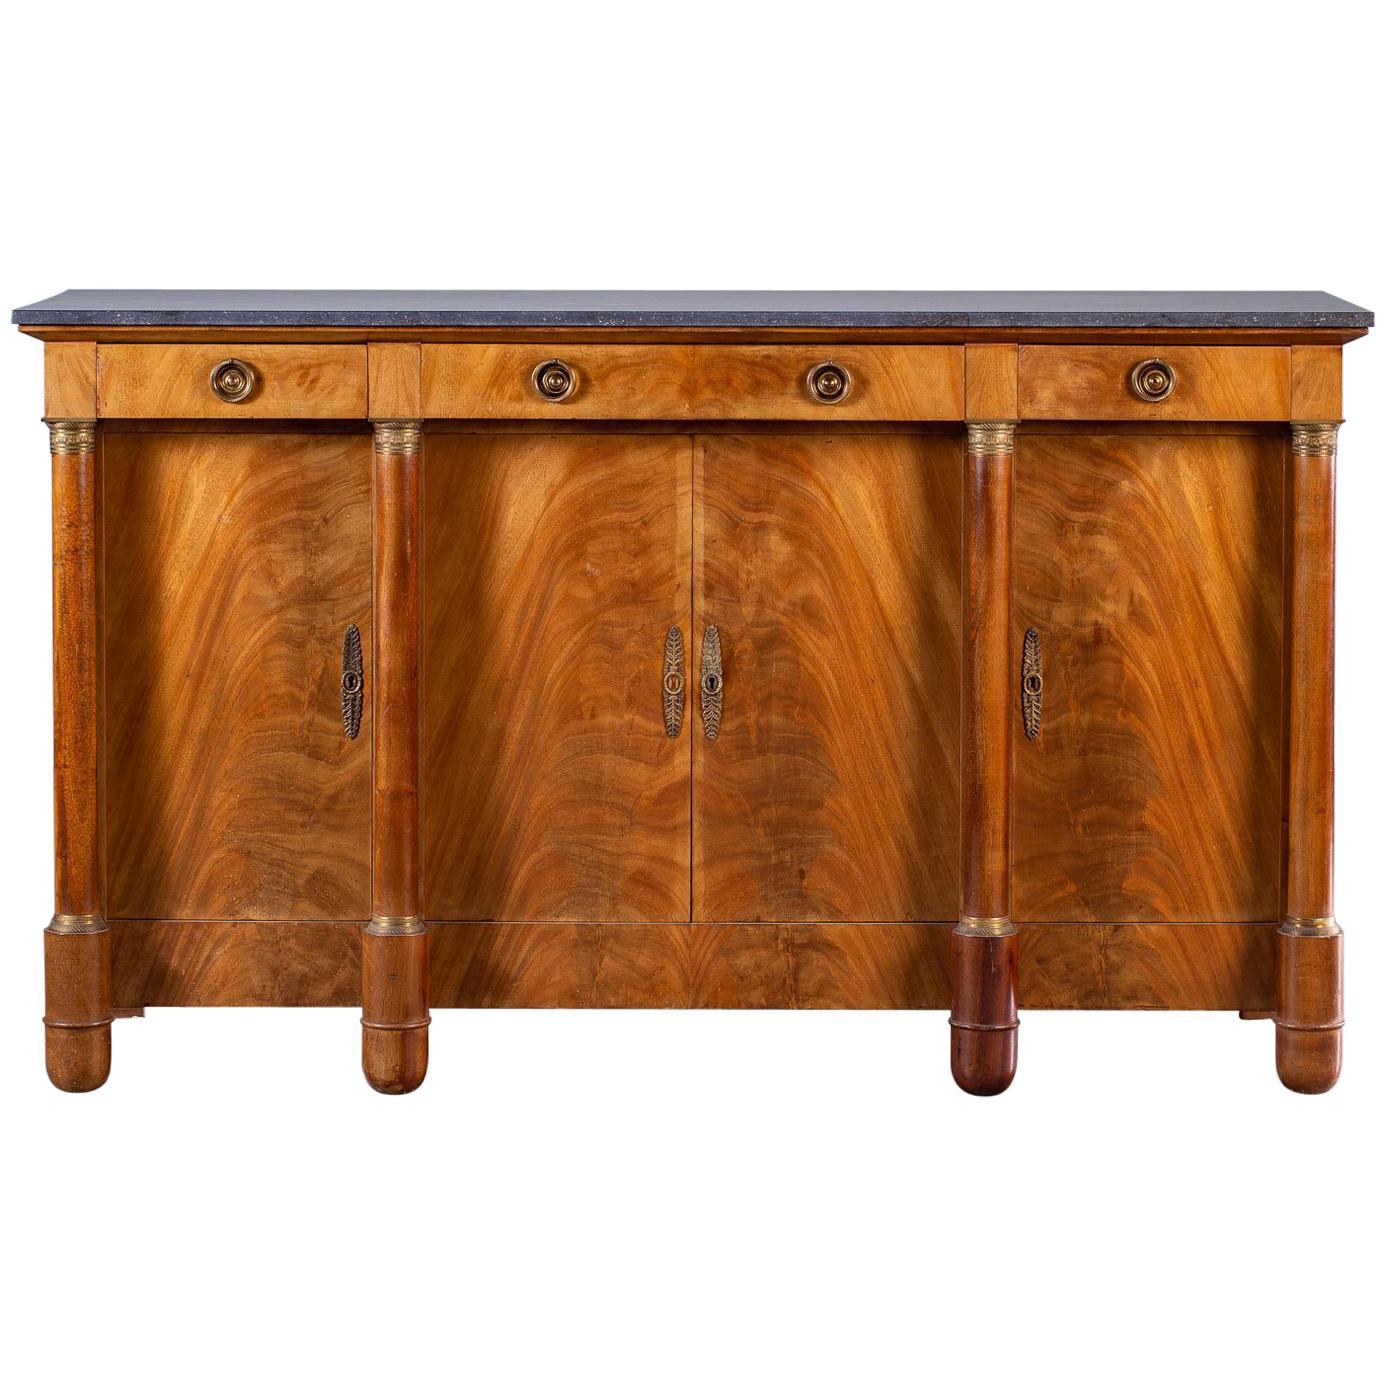 Vintage French Empire Style Mahogany Marble Top Buffet, circa 1920